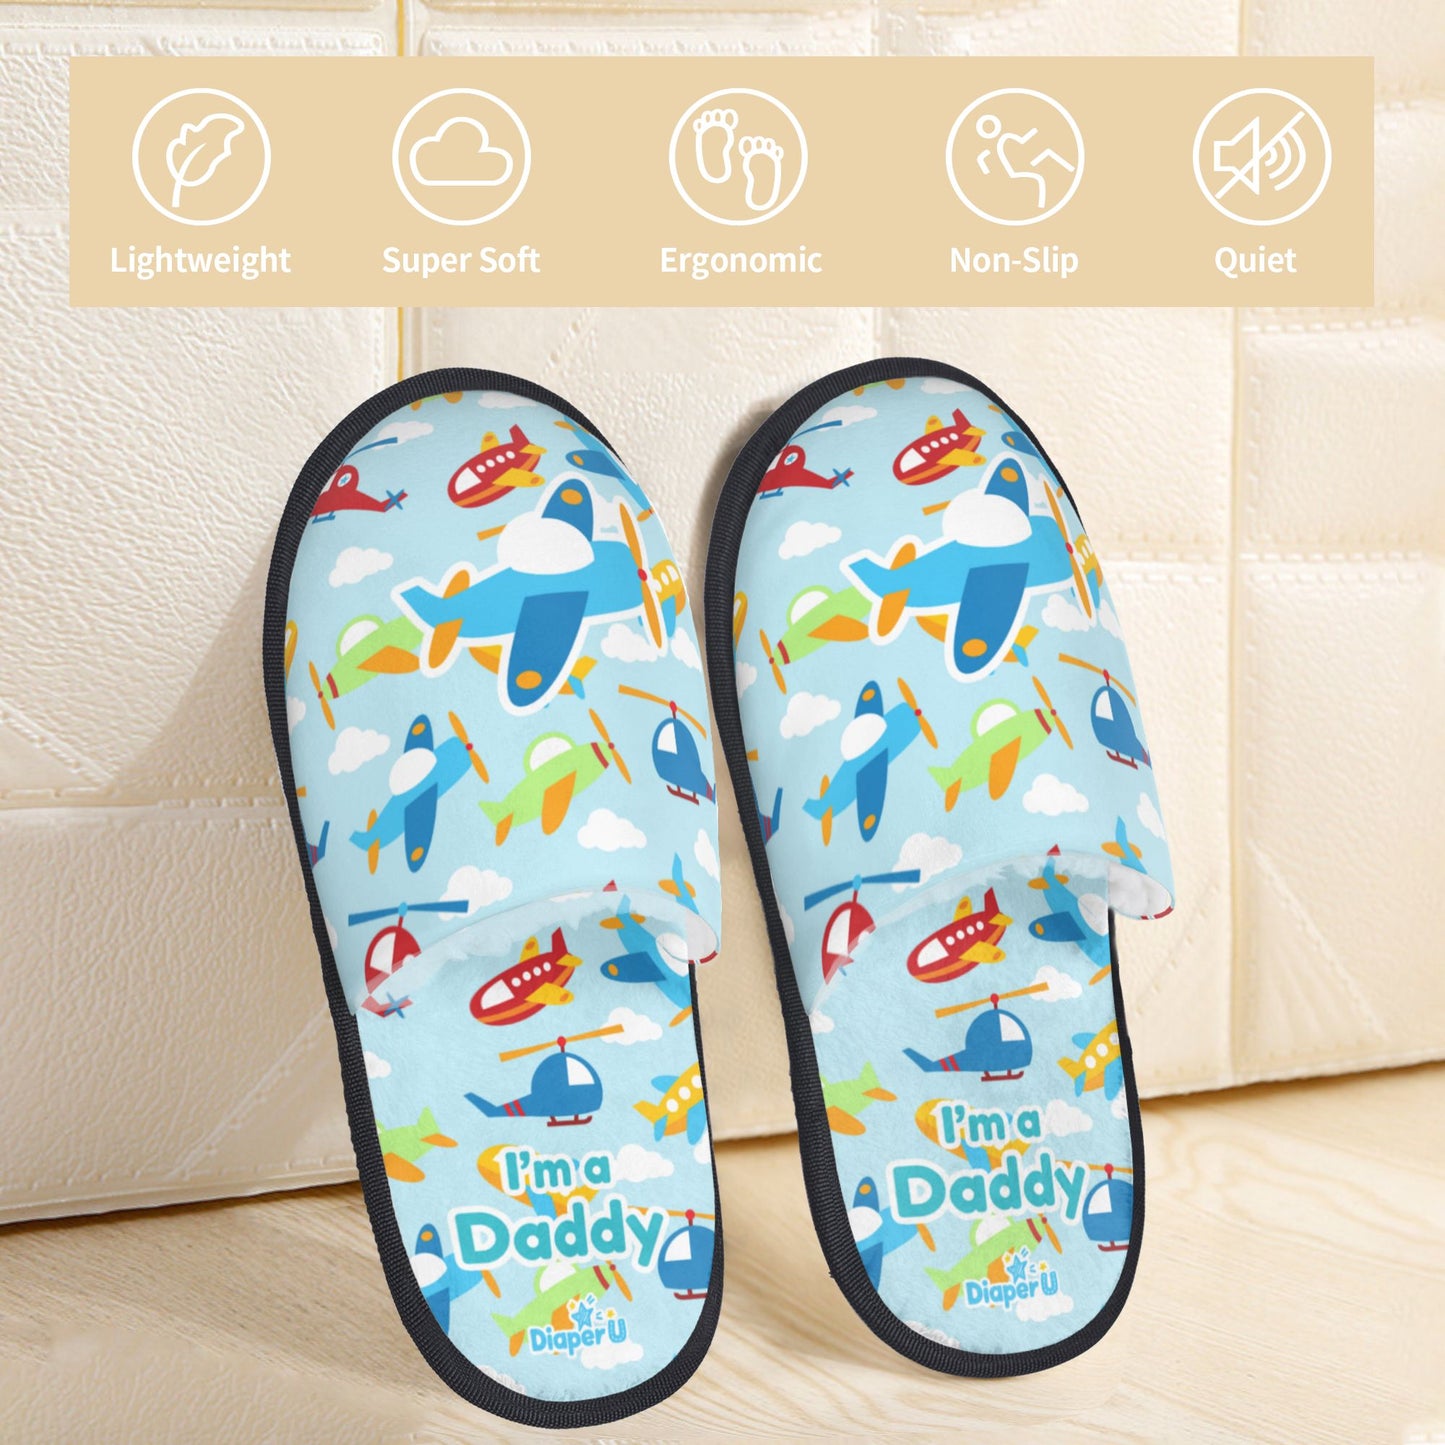 ABDL Slippers - Airplane